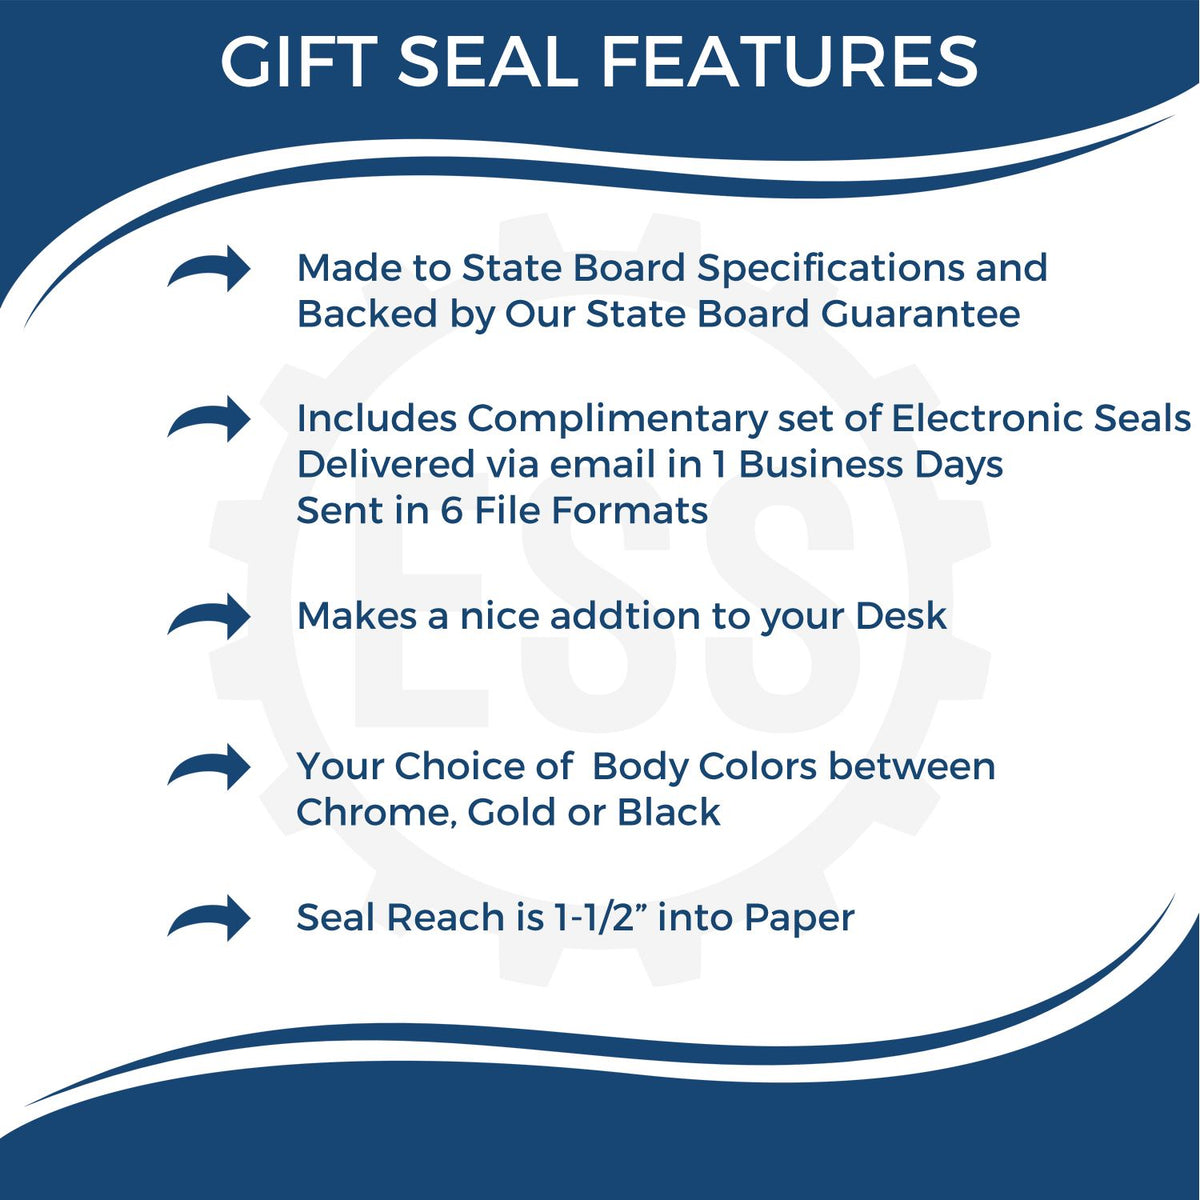 A picture of an infographic highlighting the selling points for the Gift Tennessee Geologist Seal